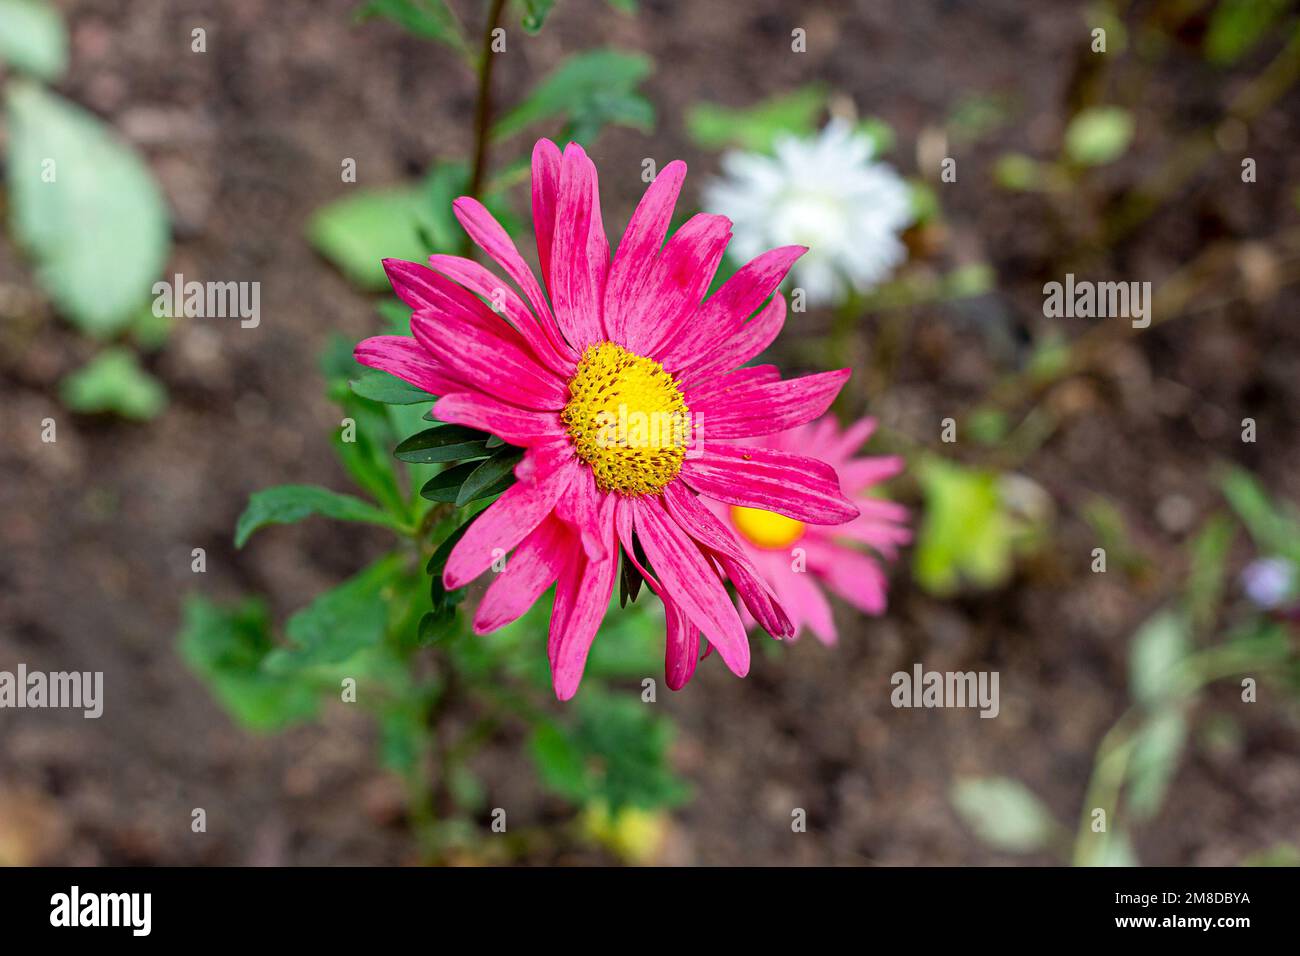 Bright pink Chrysanthemum flower with green leaves in the garden in autumn. Stock Photo